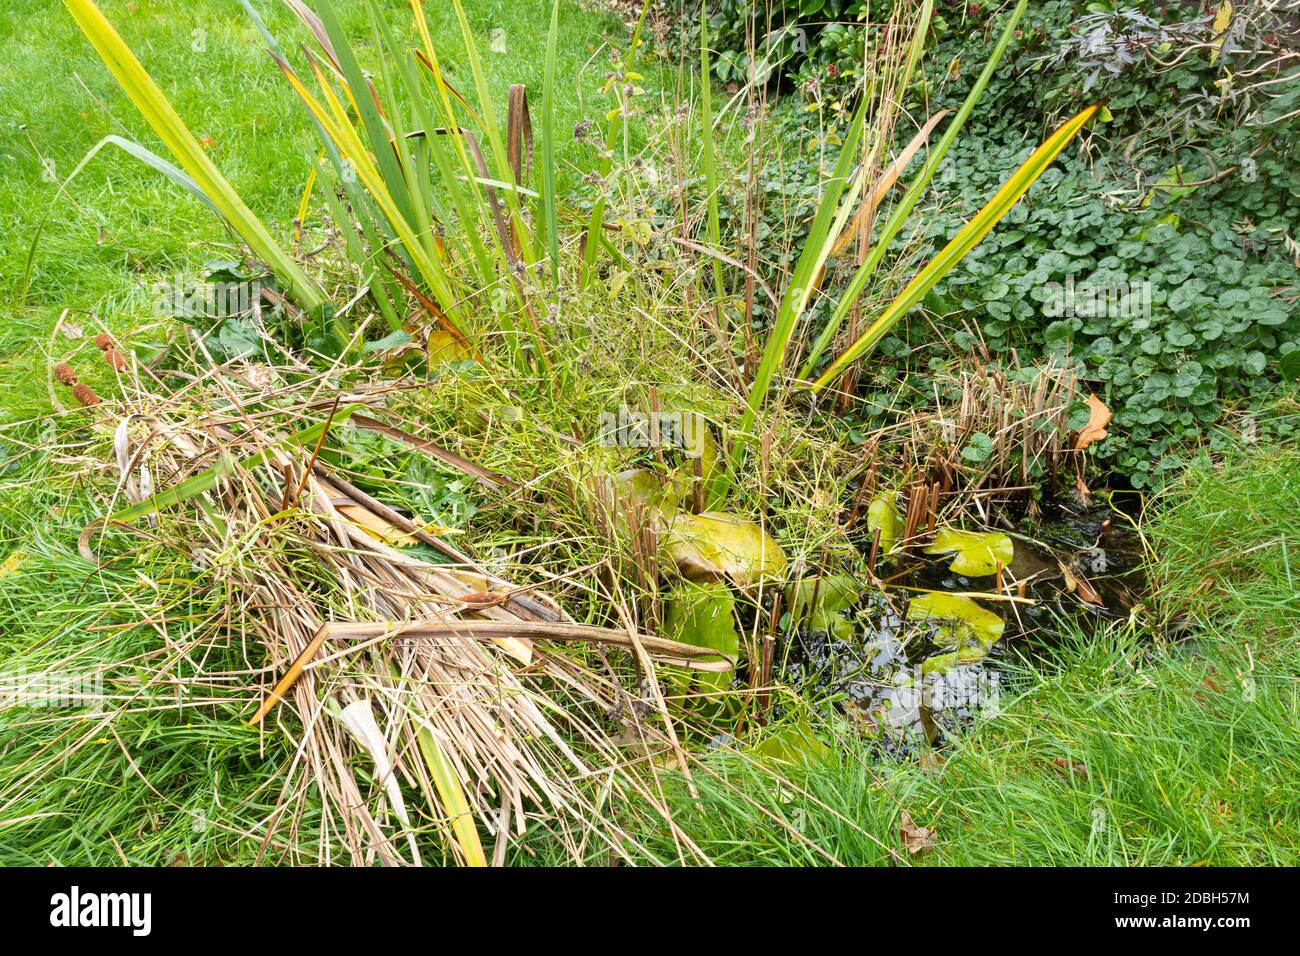 Maintaining a garden wildlife pond in autumn 2, UK. Pondside plant cuttings left at the pond edge to allow any wildlife to go back to the pond. Stock Photo